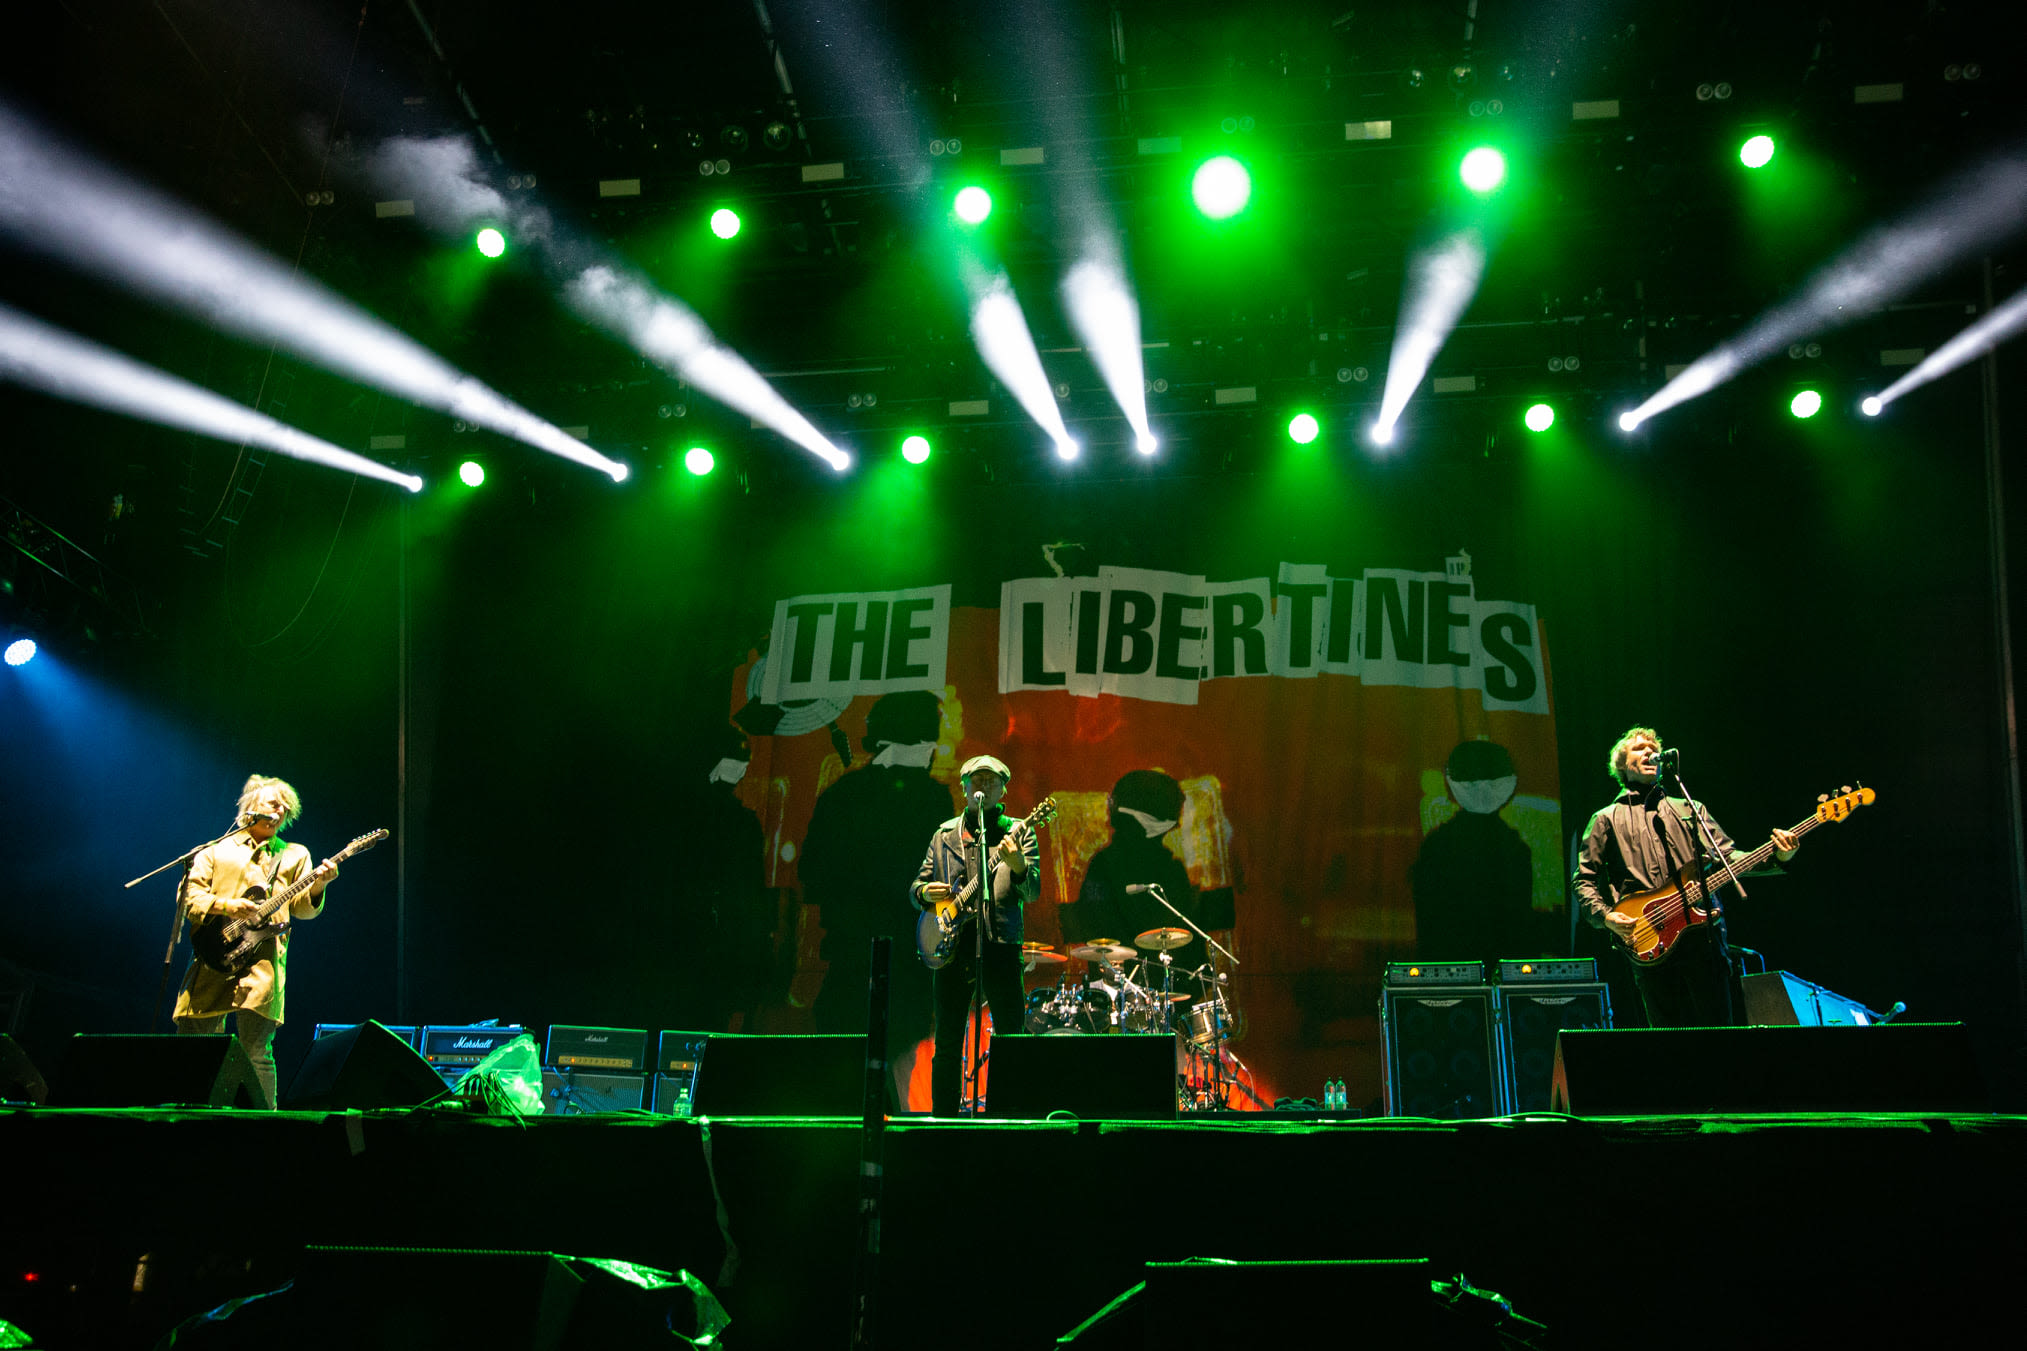 The Libertines on stage at the Virgin Money Unity Arena